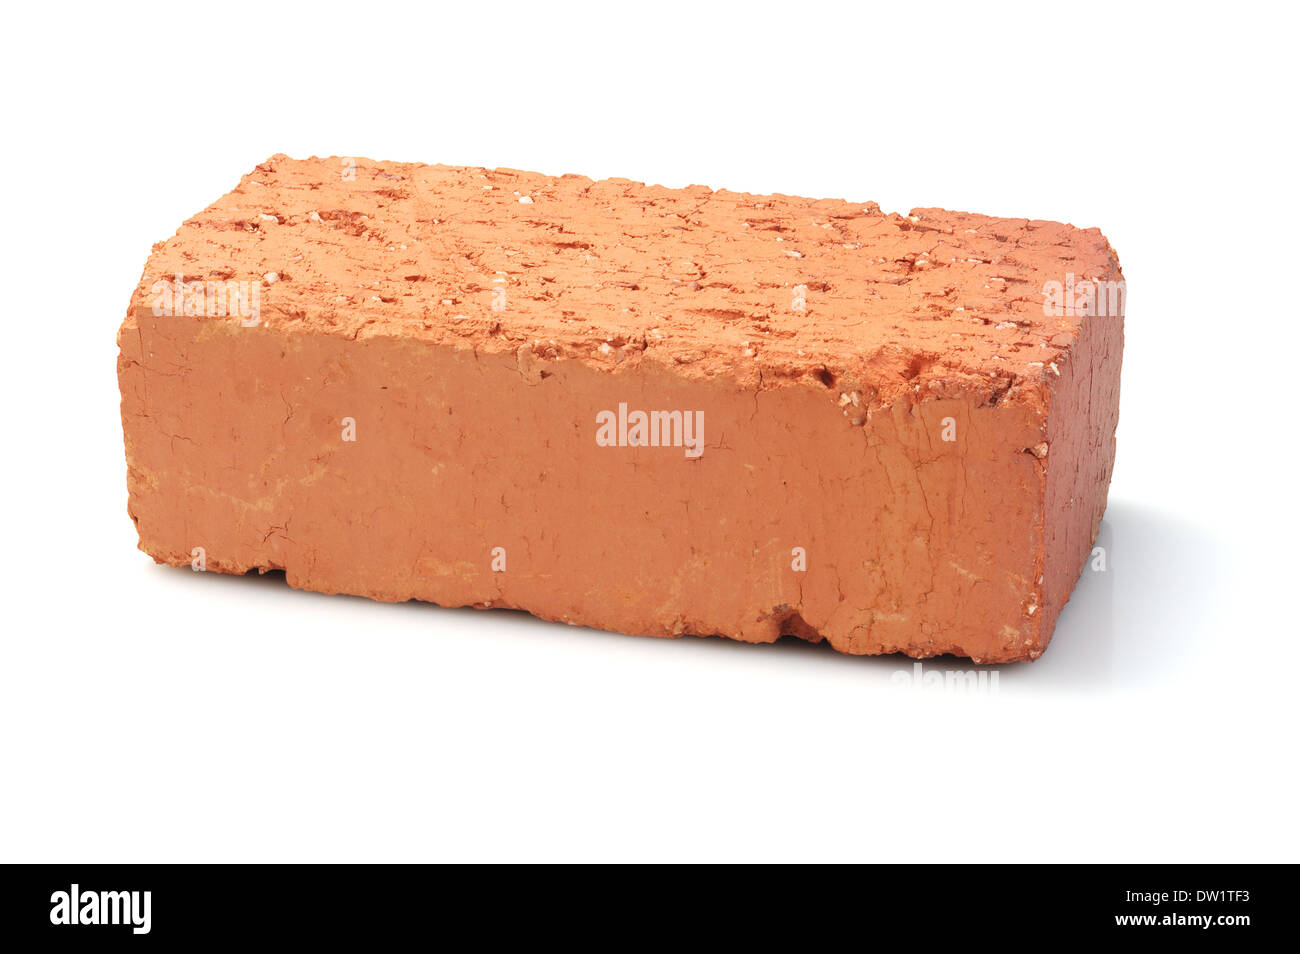 Red Clay Brick On White Background Stock Photo